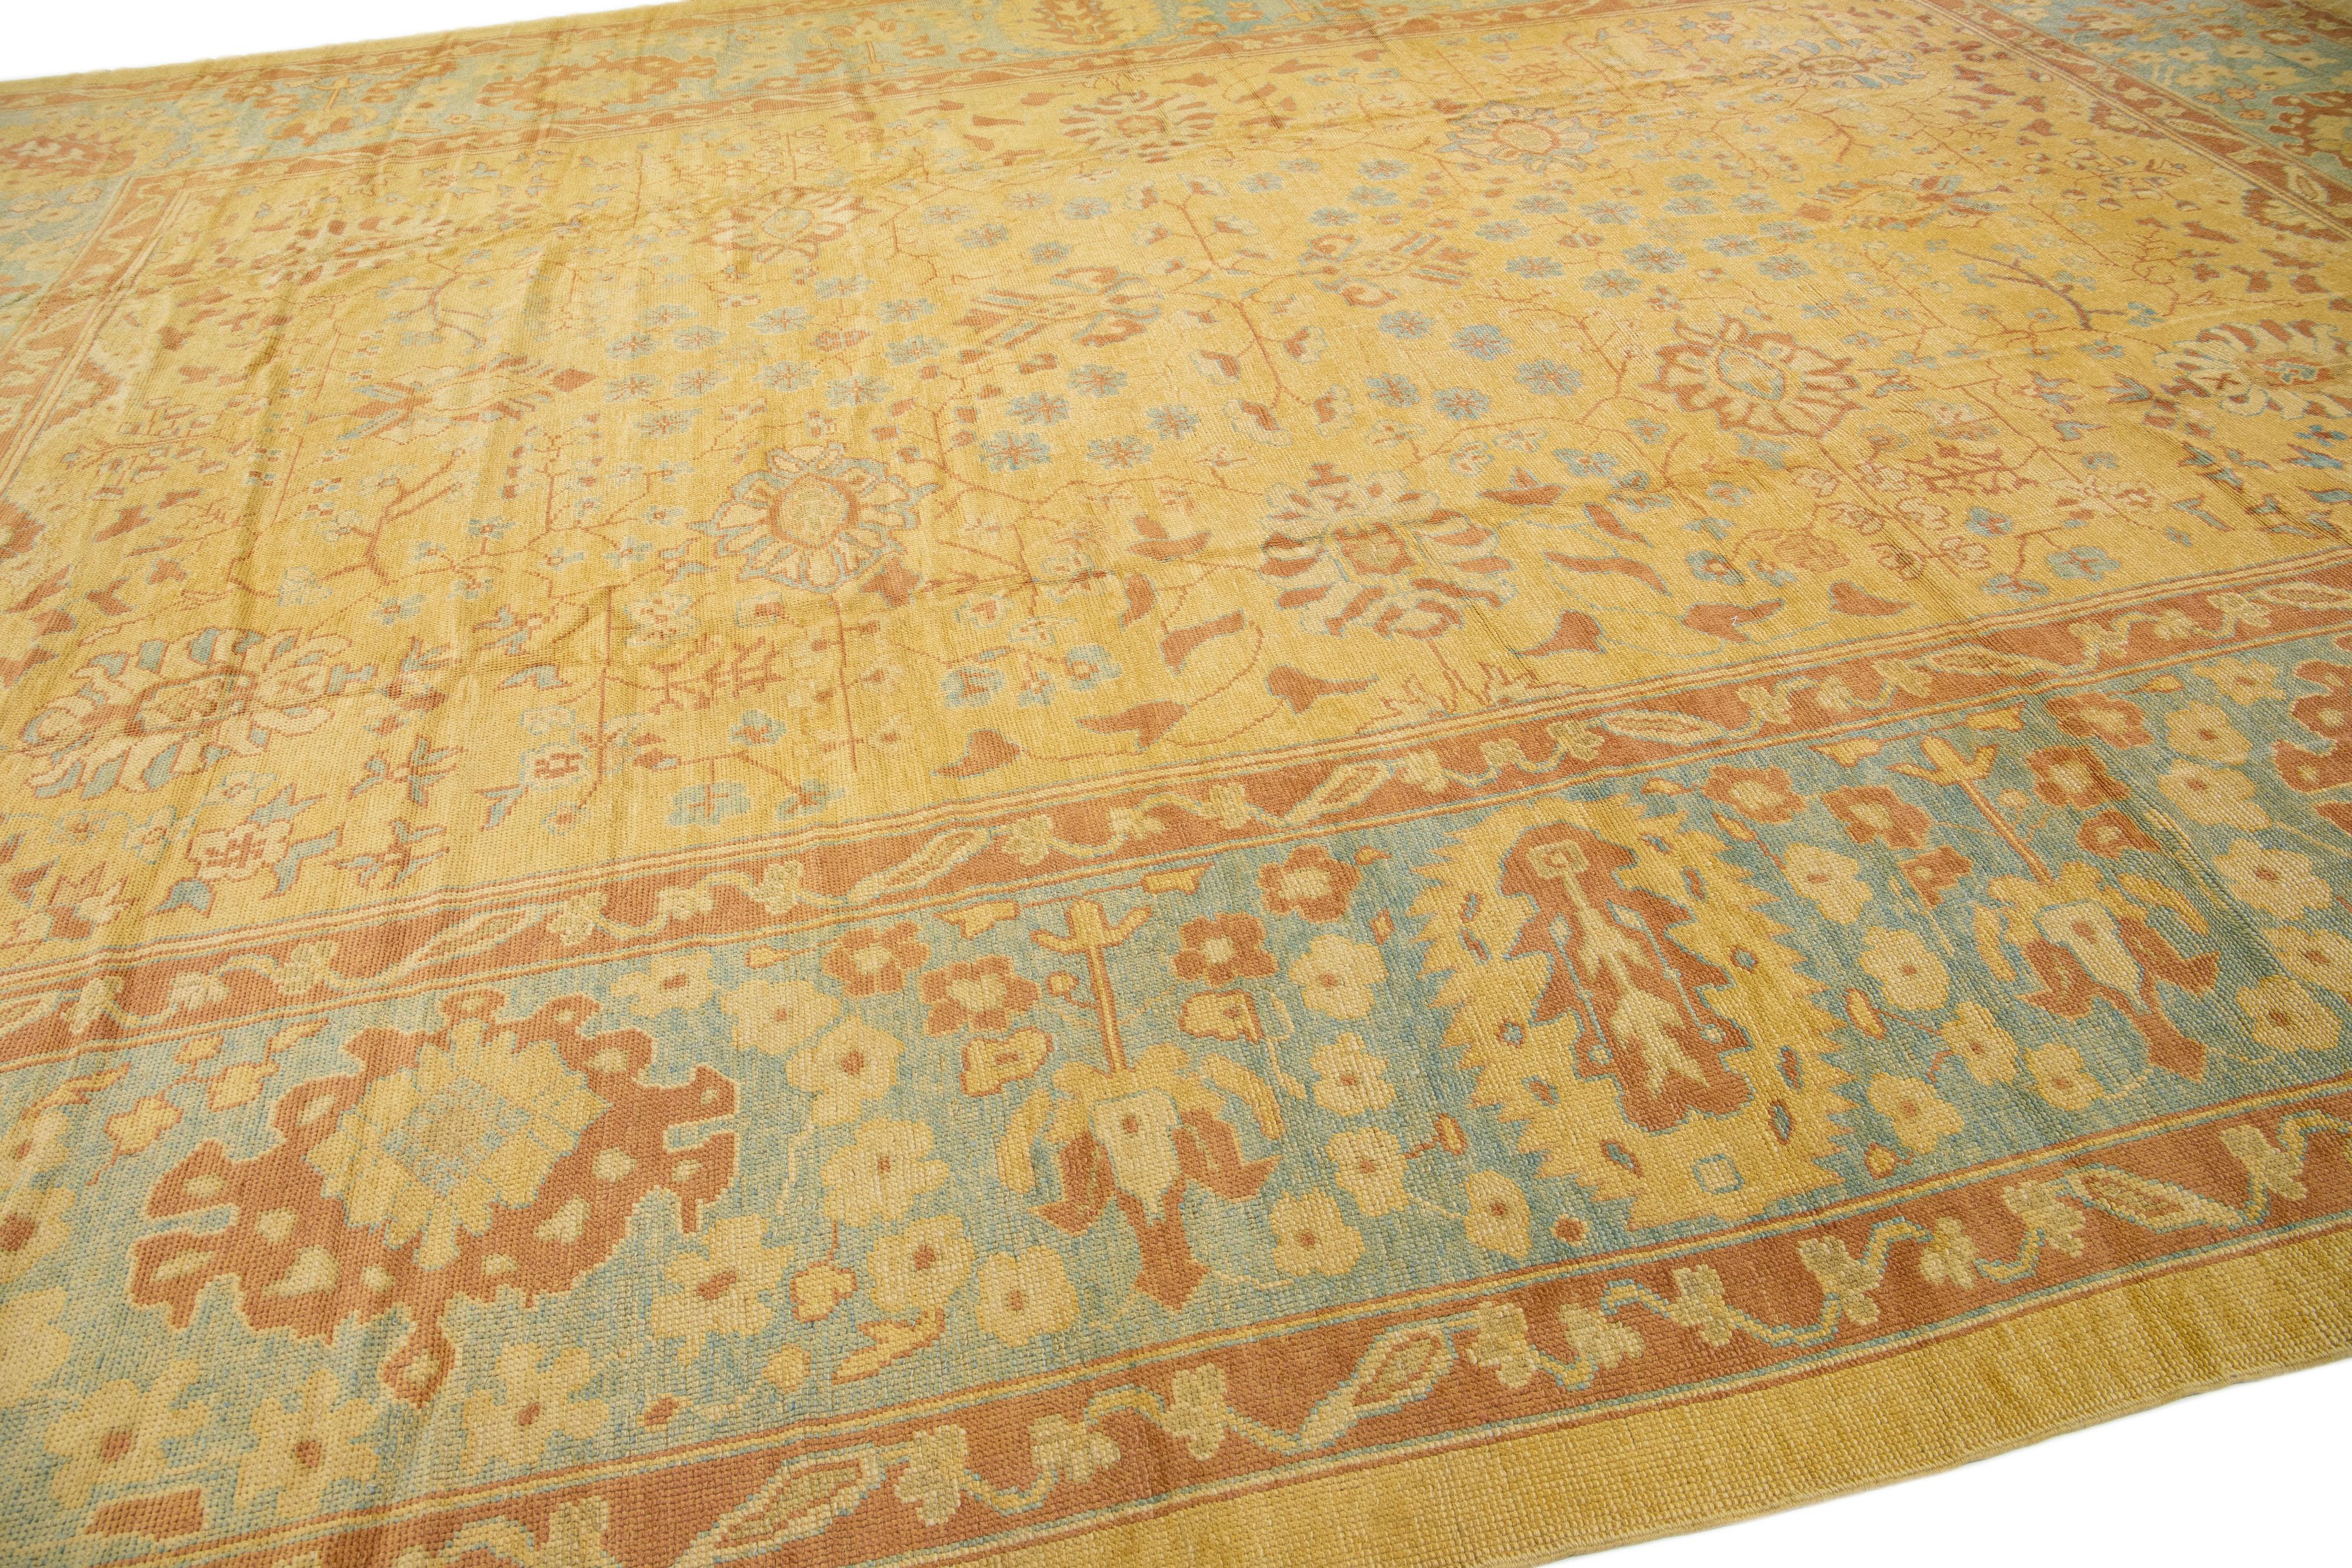 Modern Turkish Oushak Handmade Floral Wool Rug with Goldenrod Color Field In Good Condition For Sale In Norwalk, CT